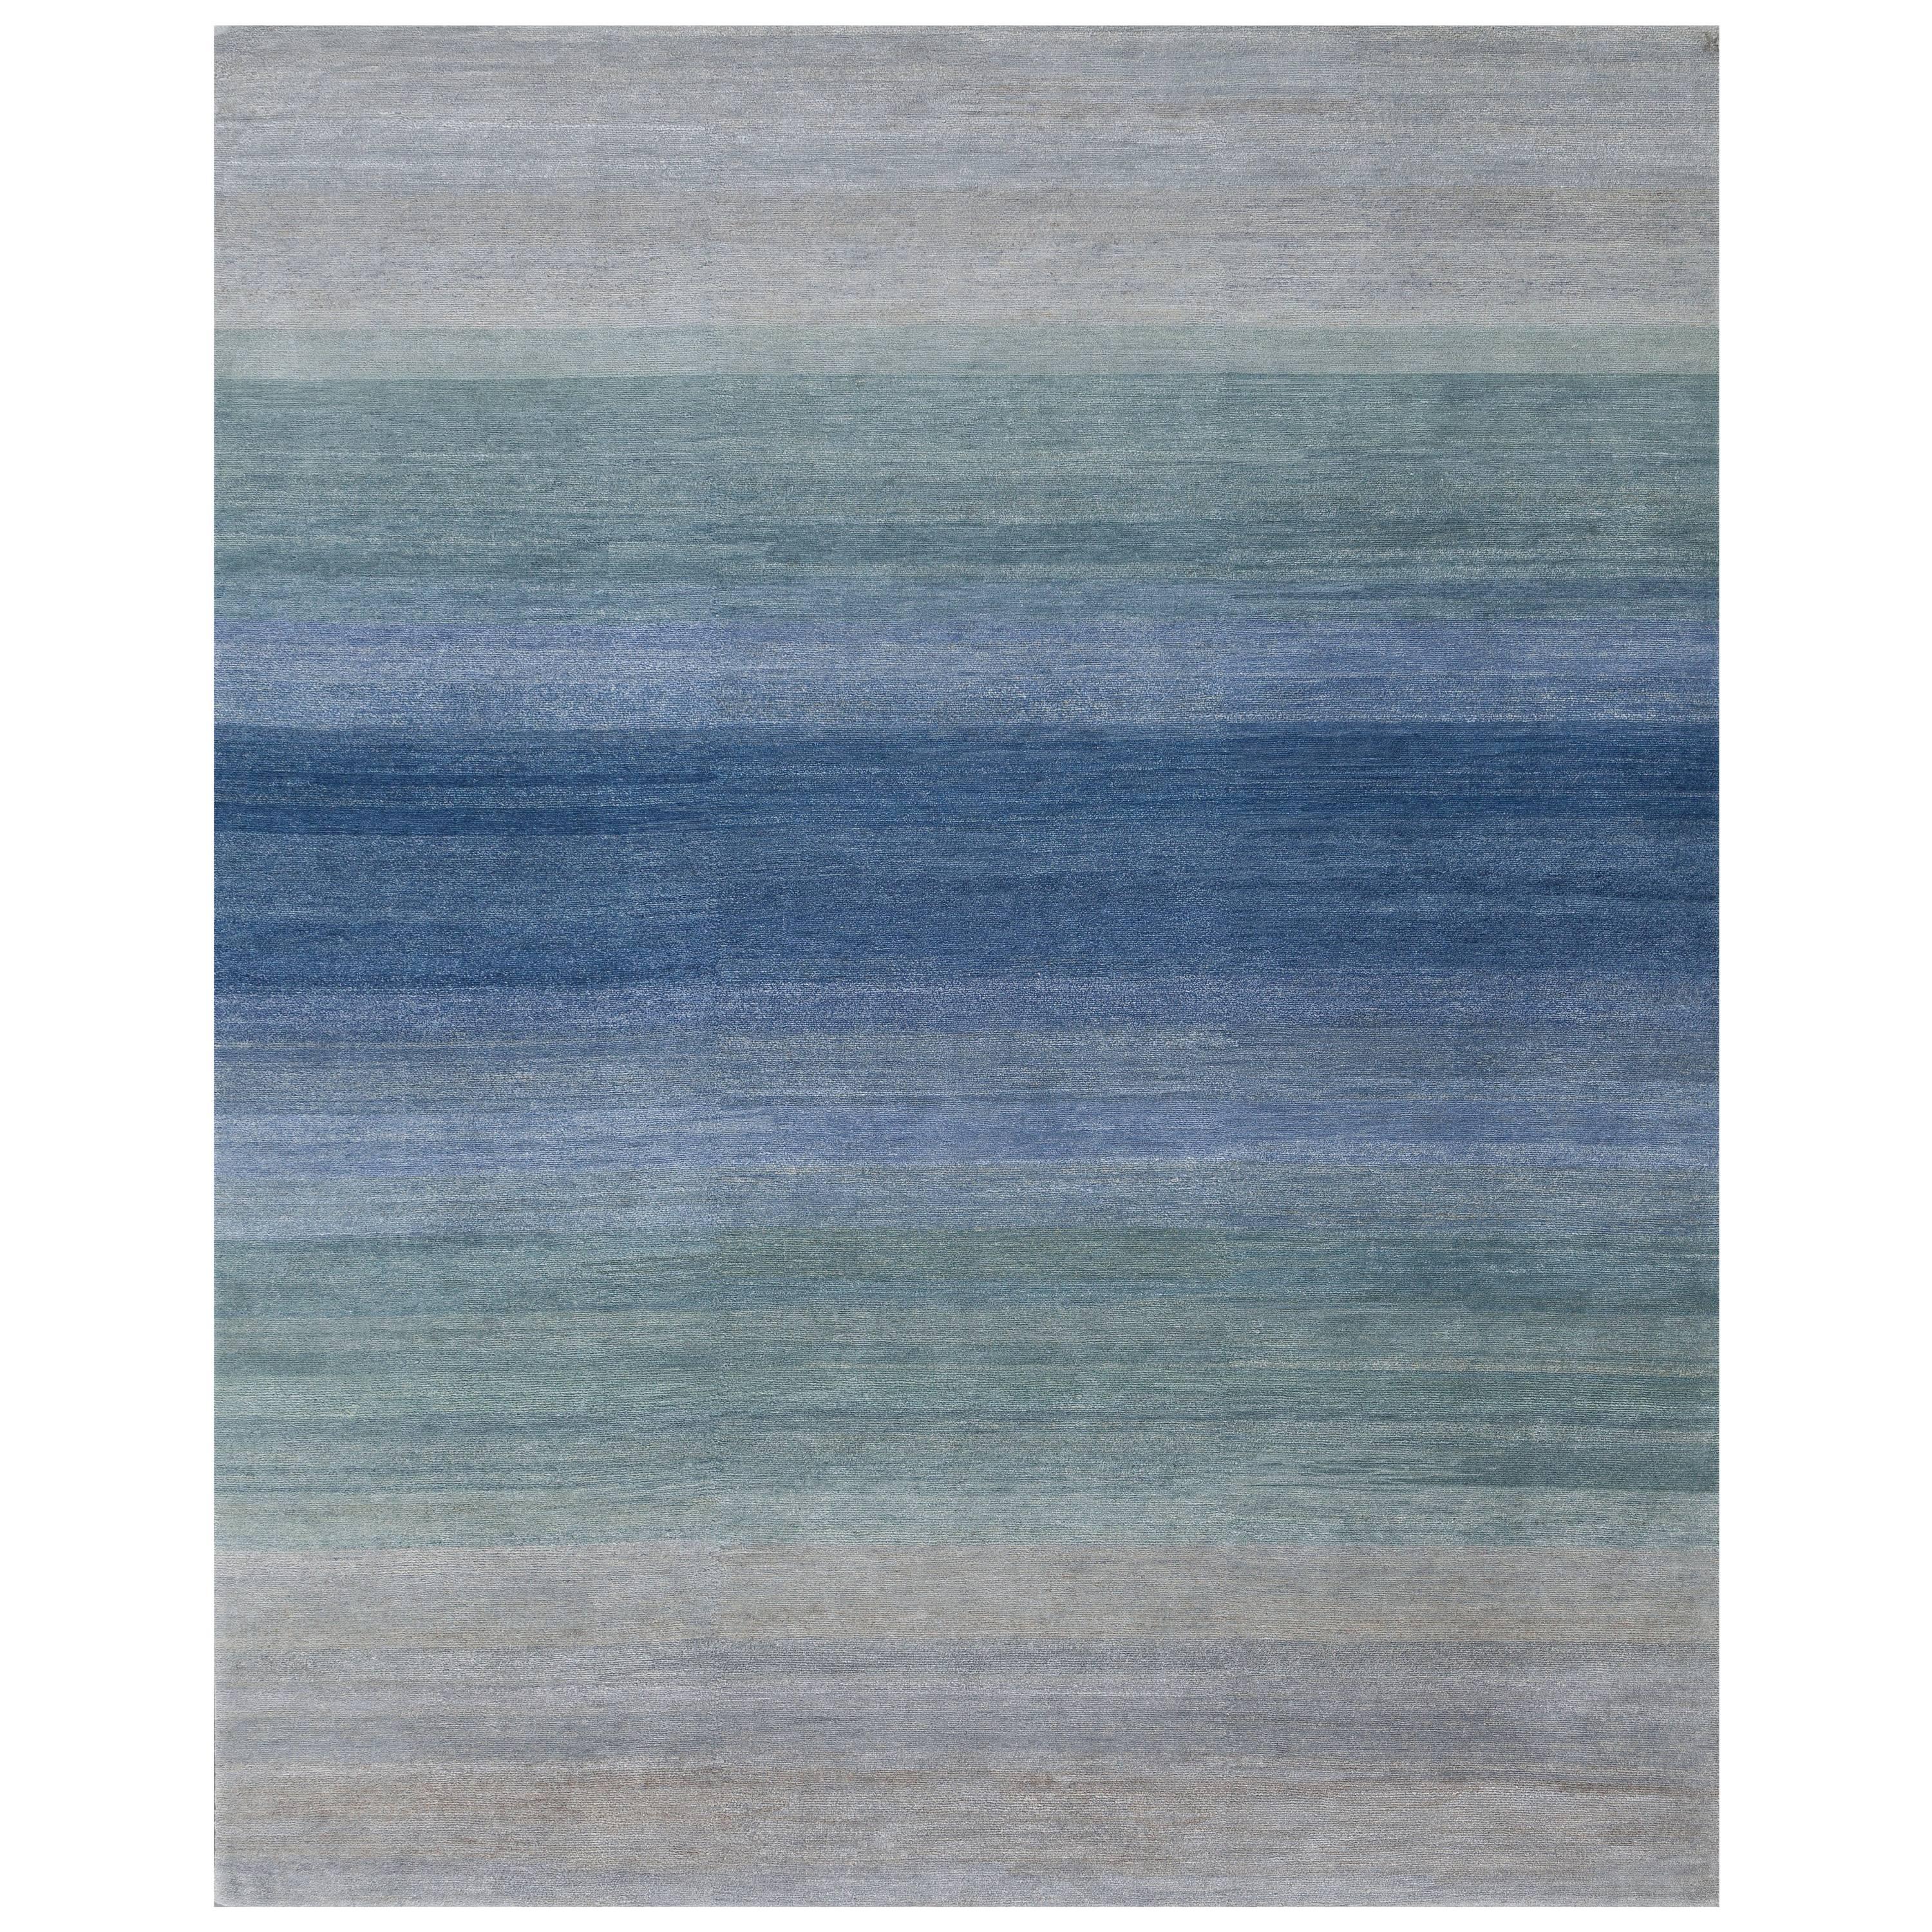 'Fade, Blues' Hand-Knotted Tibetan Rug Made in Nepal by New Moon Rugs